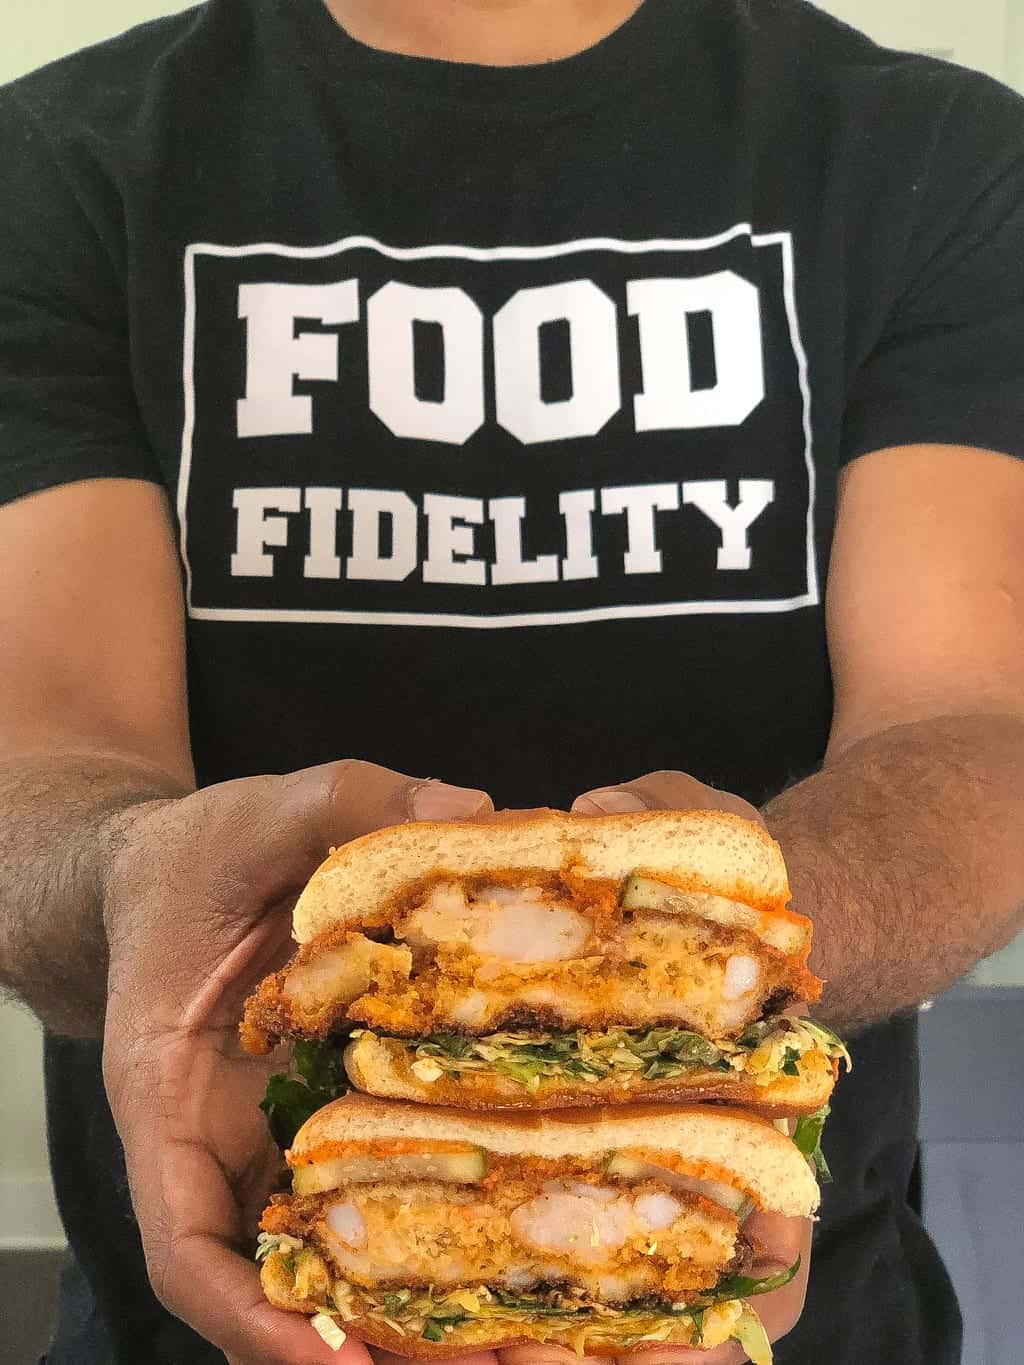 hot shrimp sandwiches being held by guy in a black tshirt